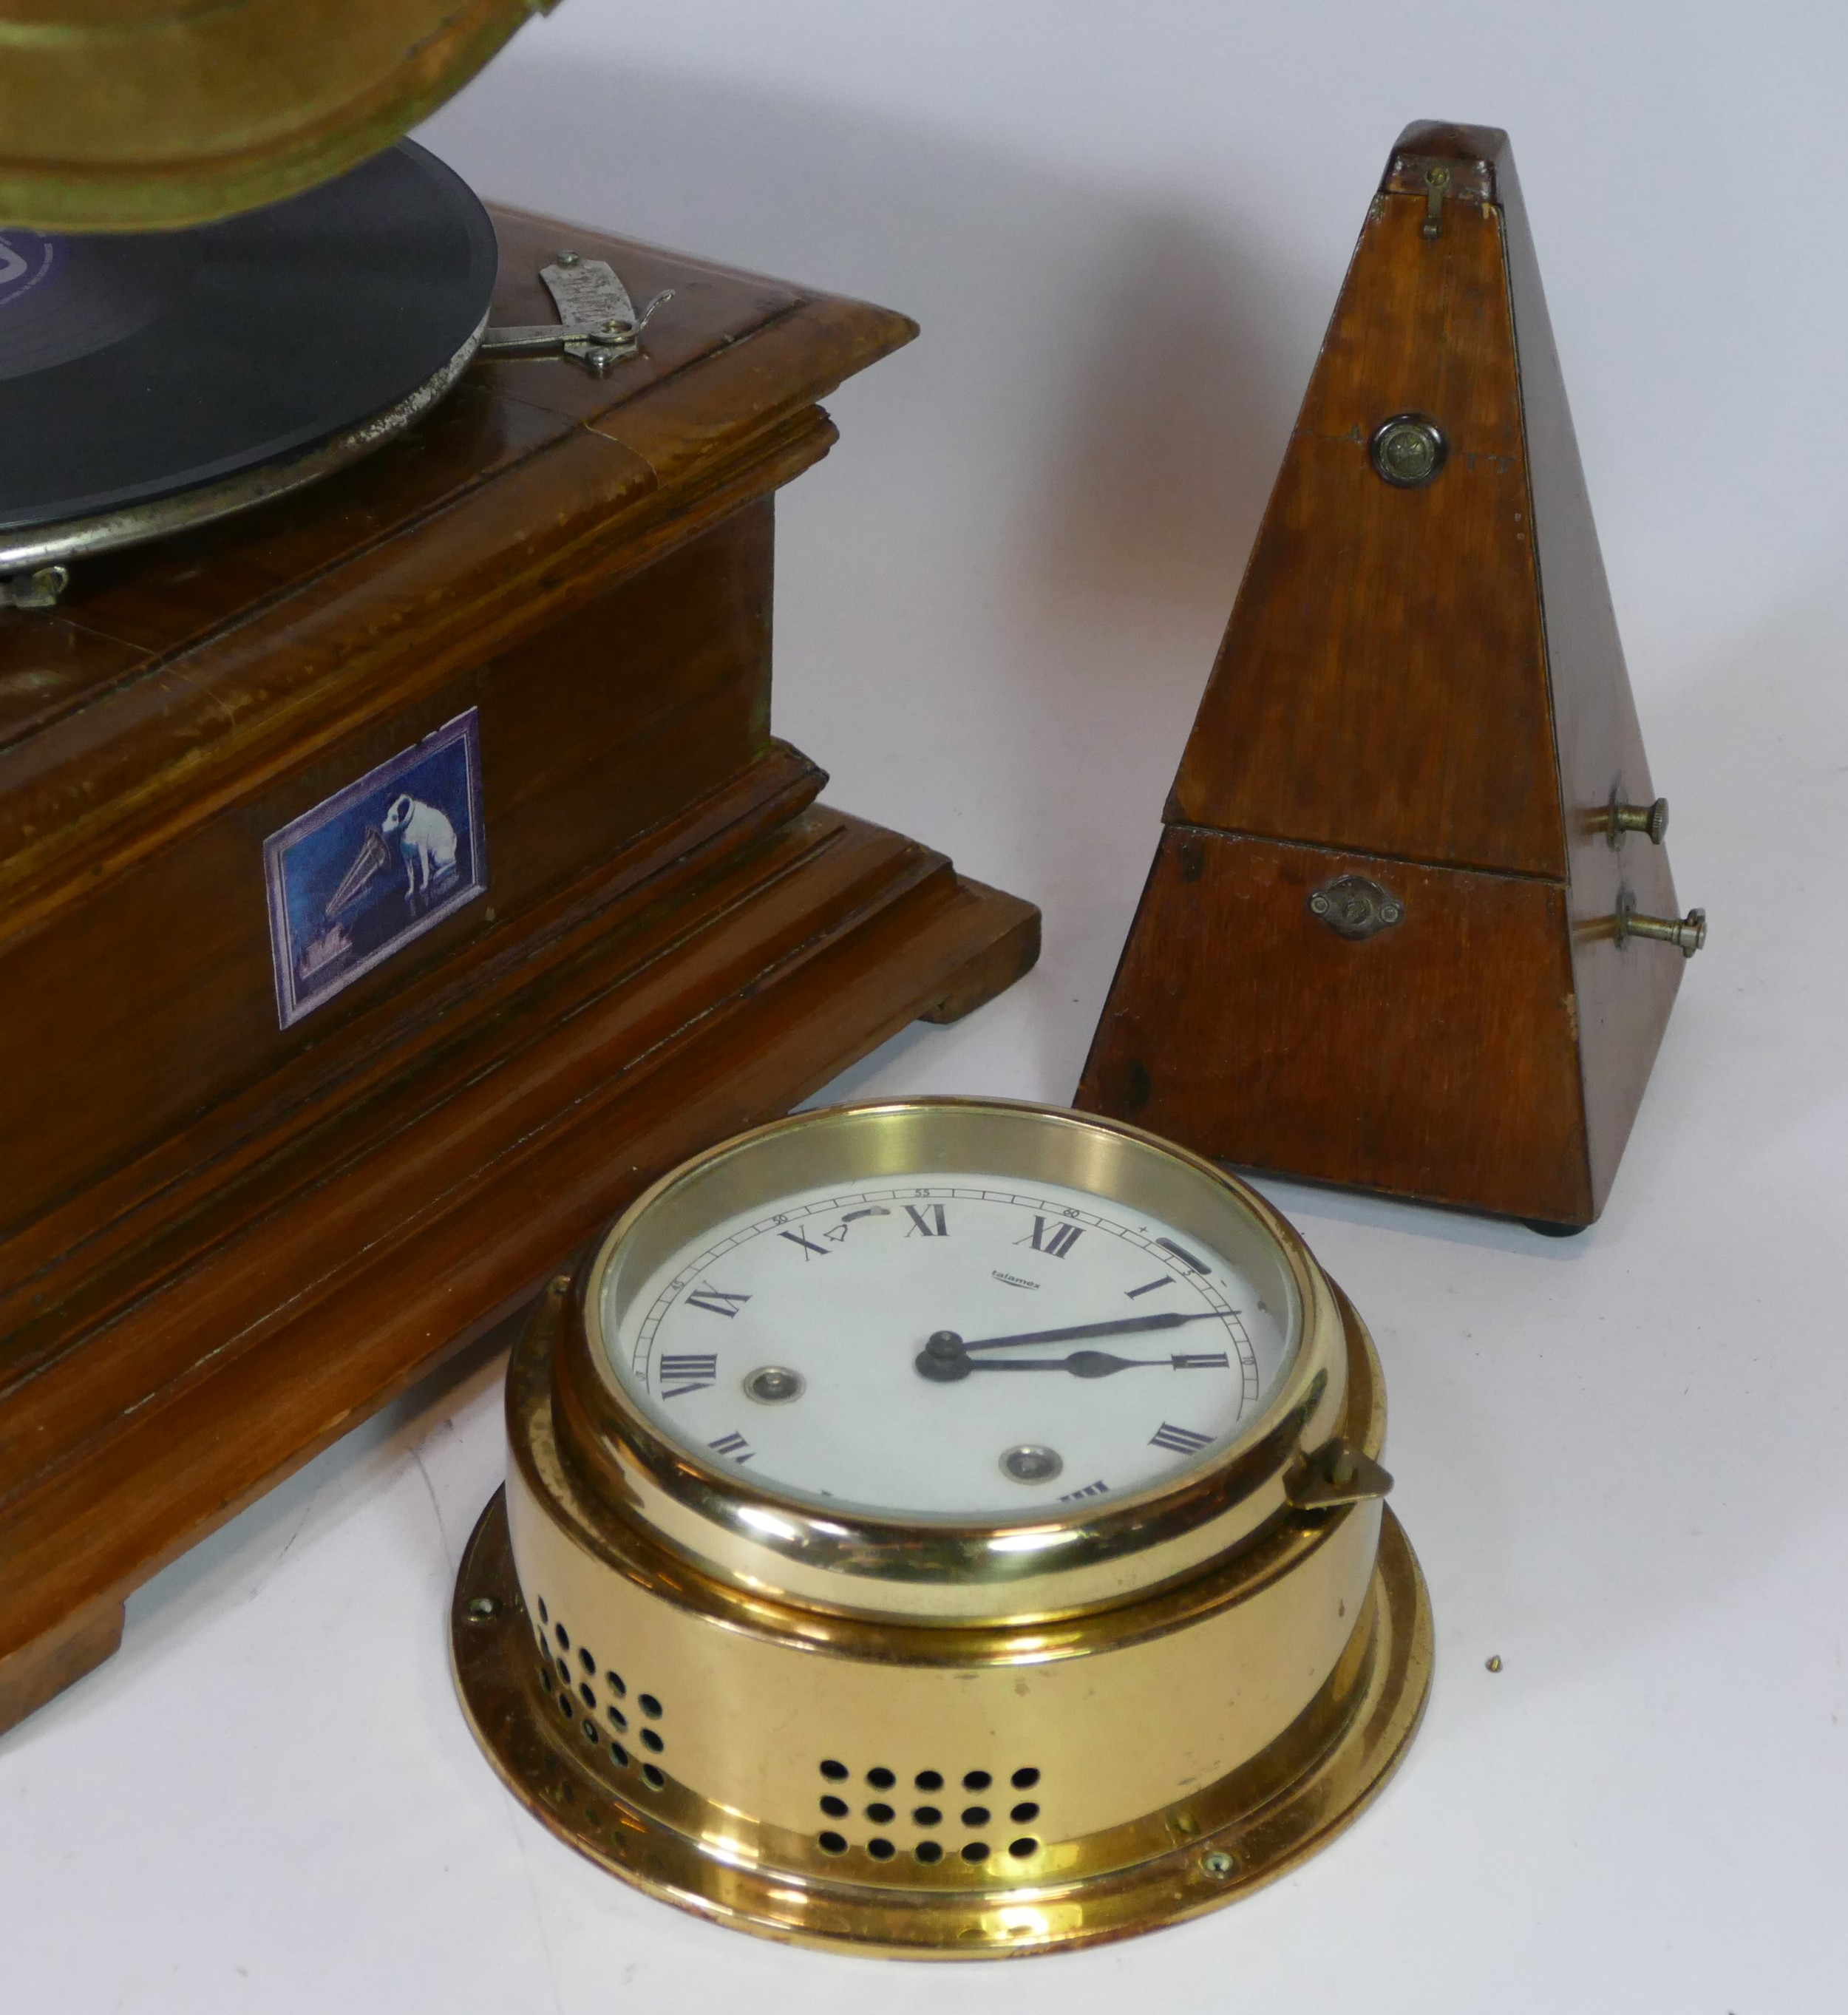 A reproduction His Masters Voice gramophone, together with a metronome and a Talamex ships bulk head - Image 2 of 2